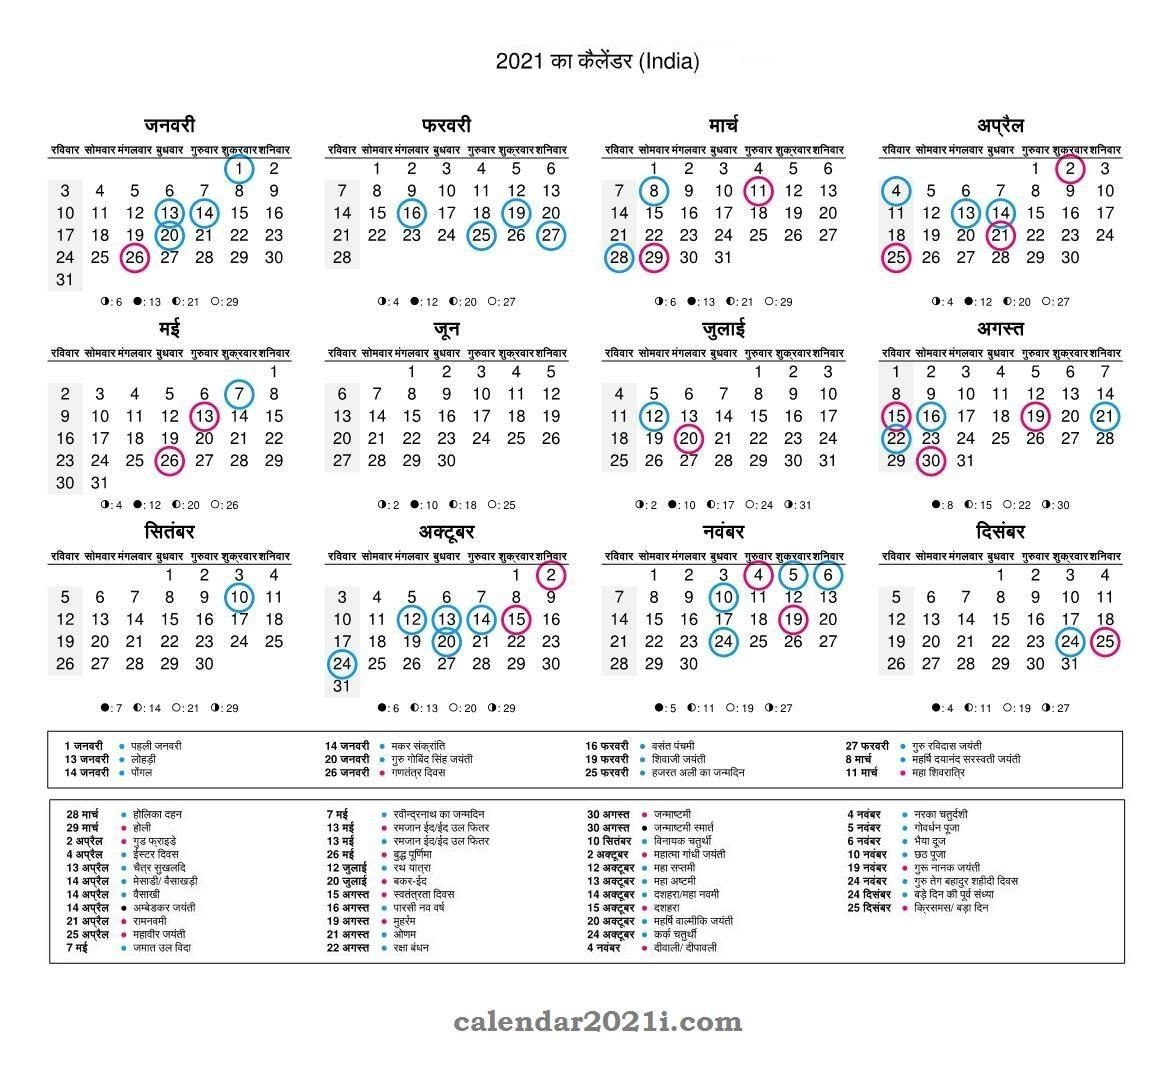 2021 India Calendar In Hindi With Holidays, Festivals